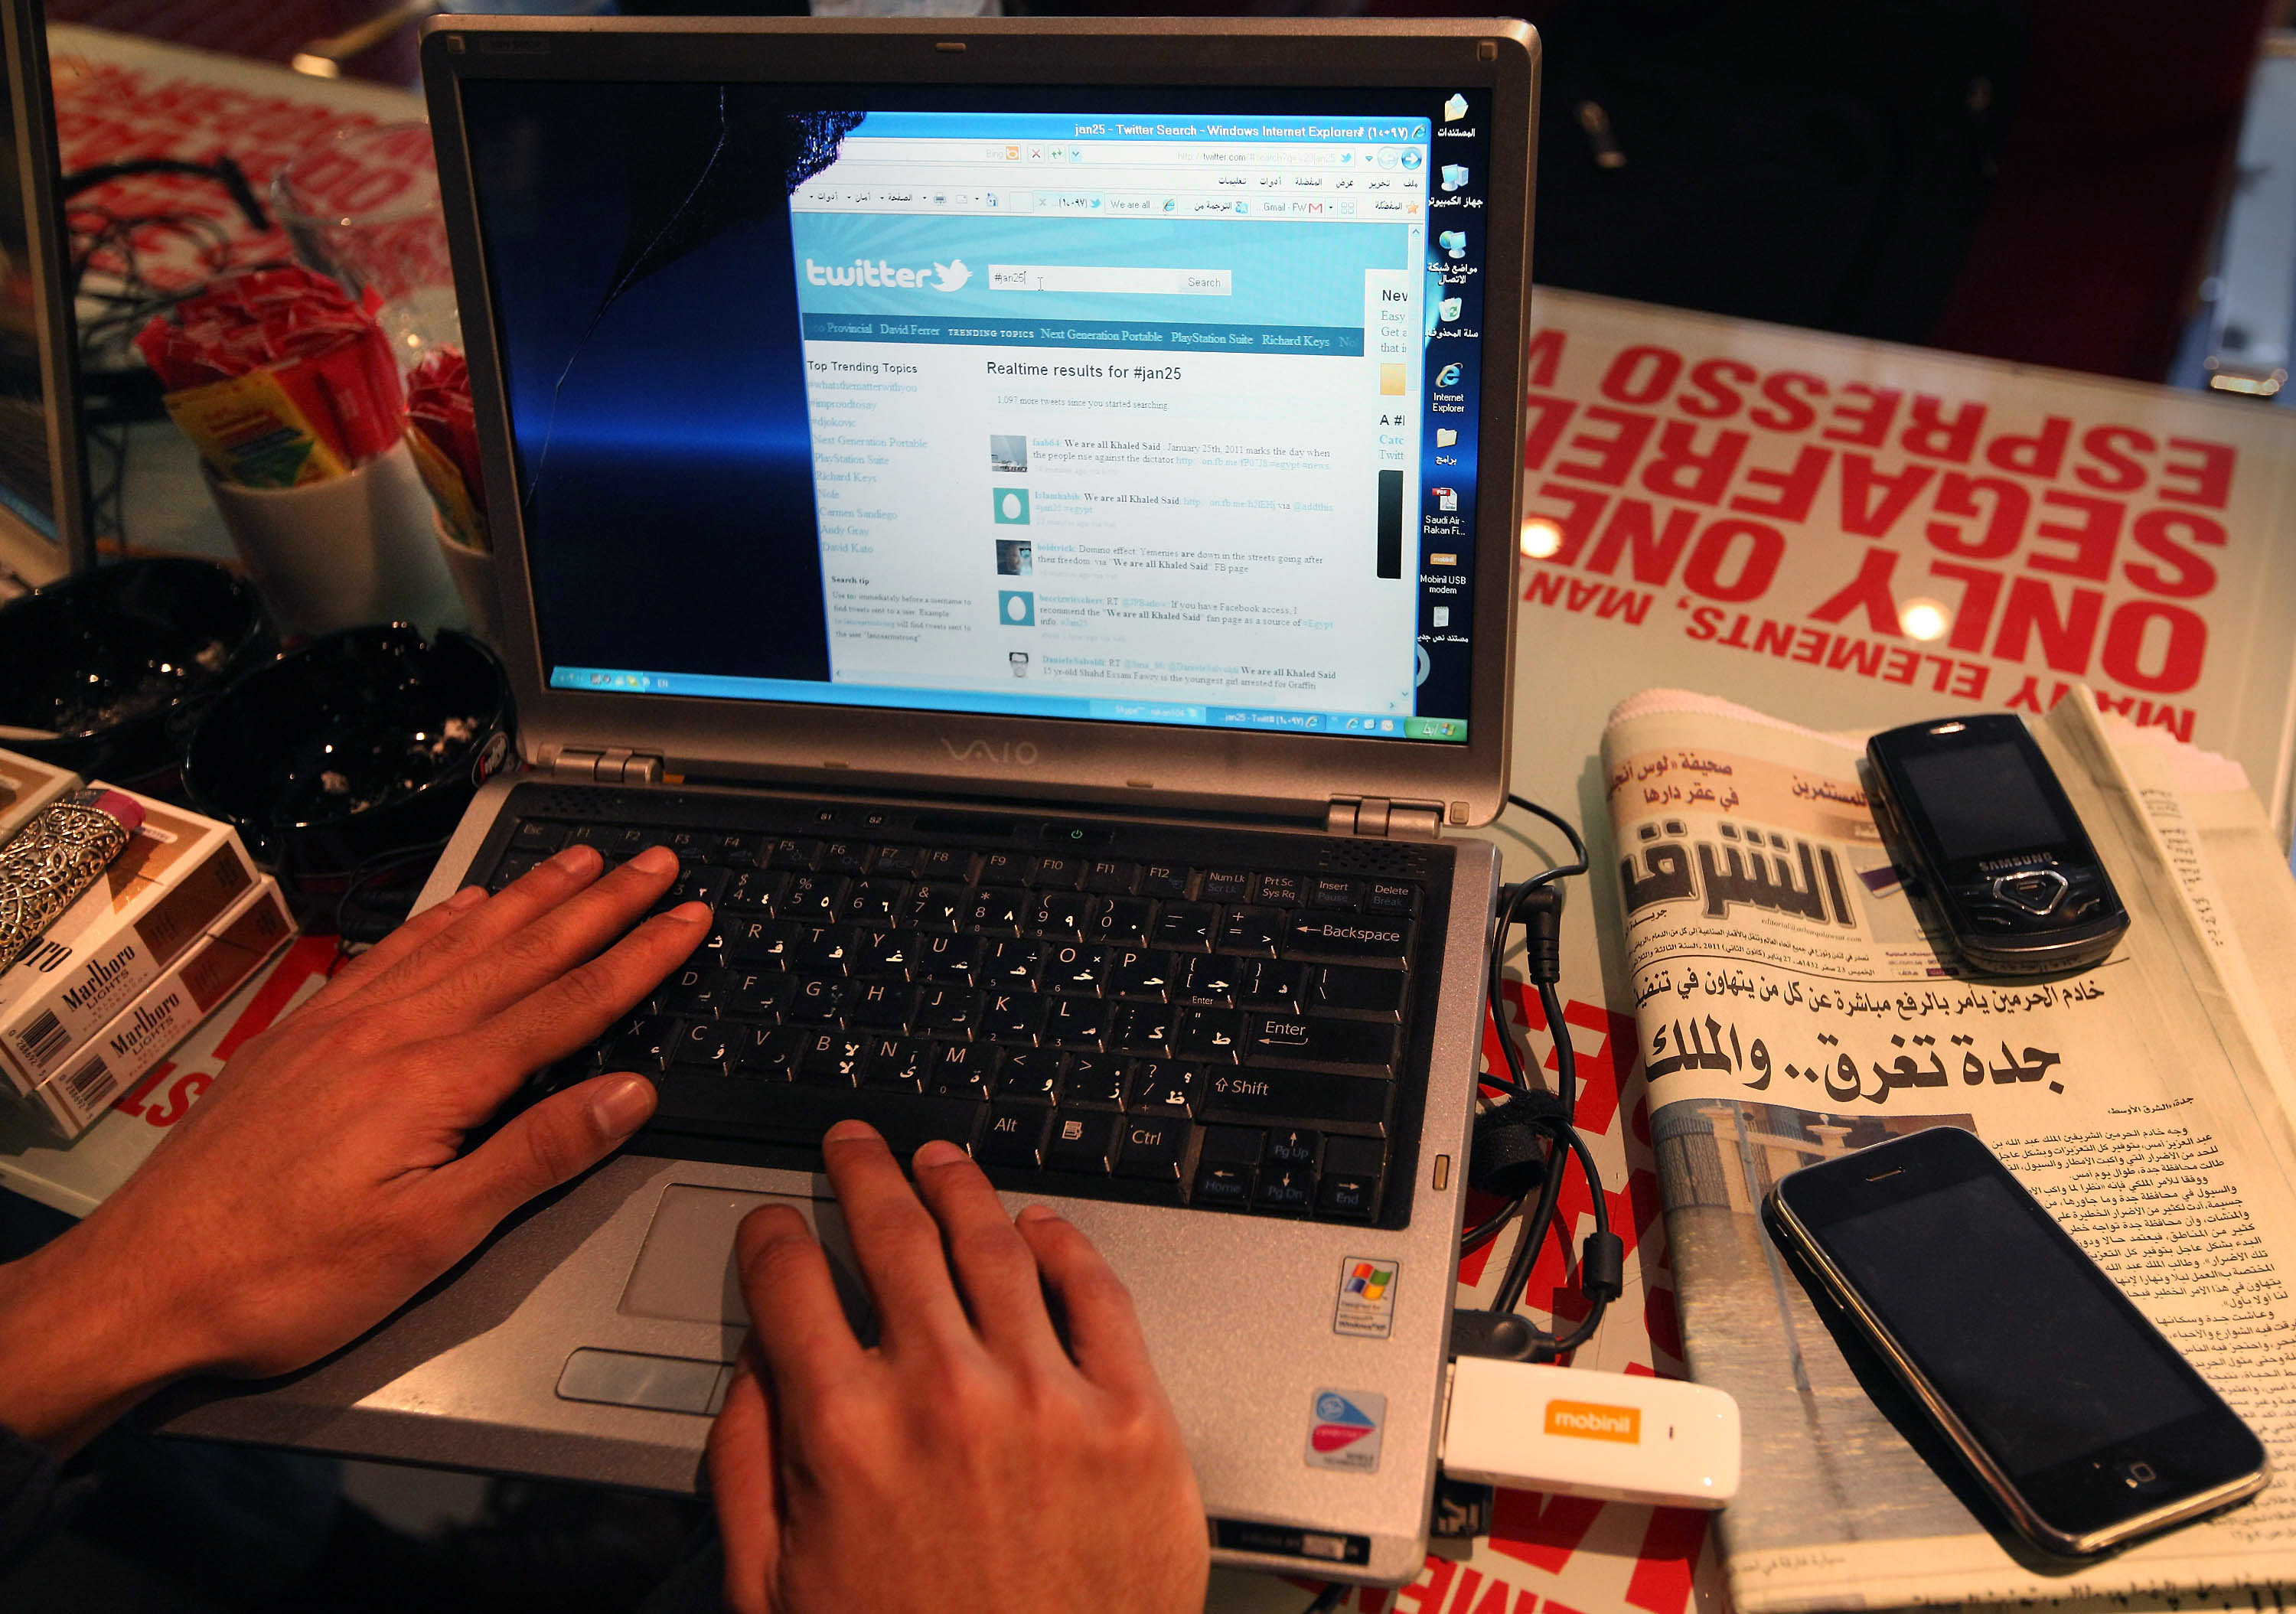 A picture of an open laptop with someone typing on it and a newspaper in arabic.